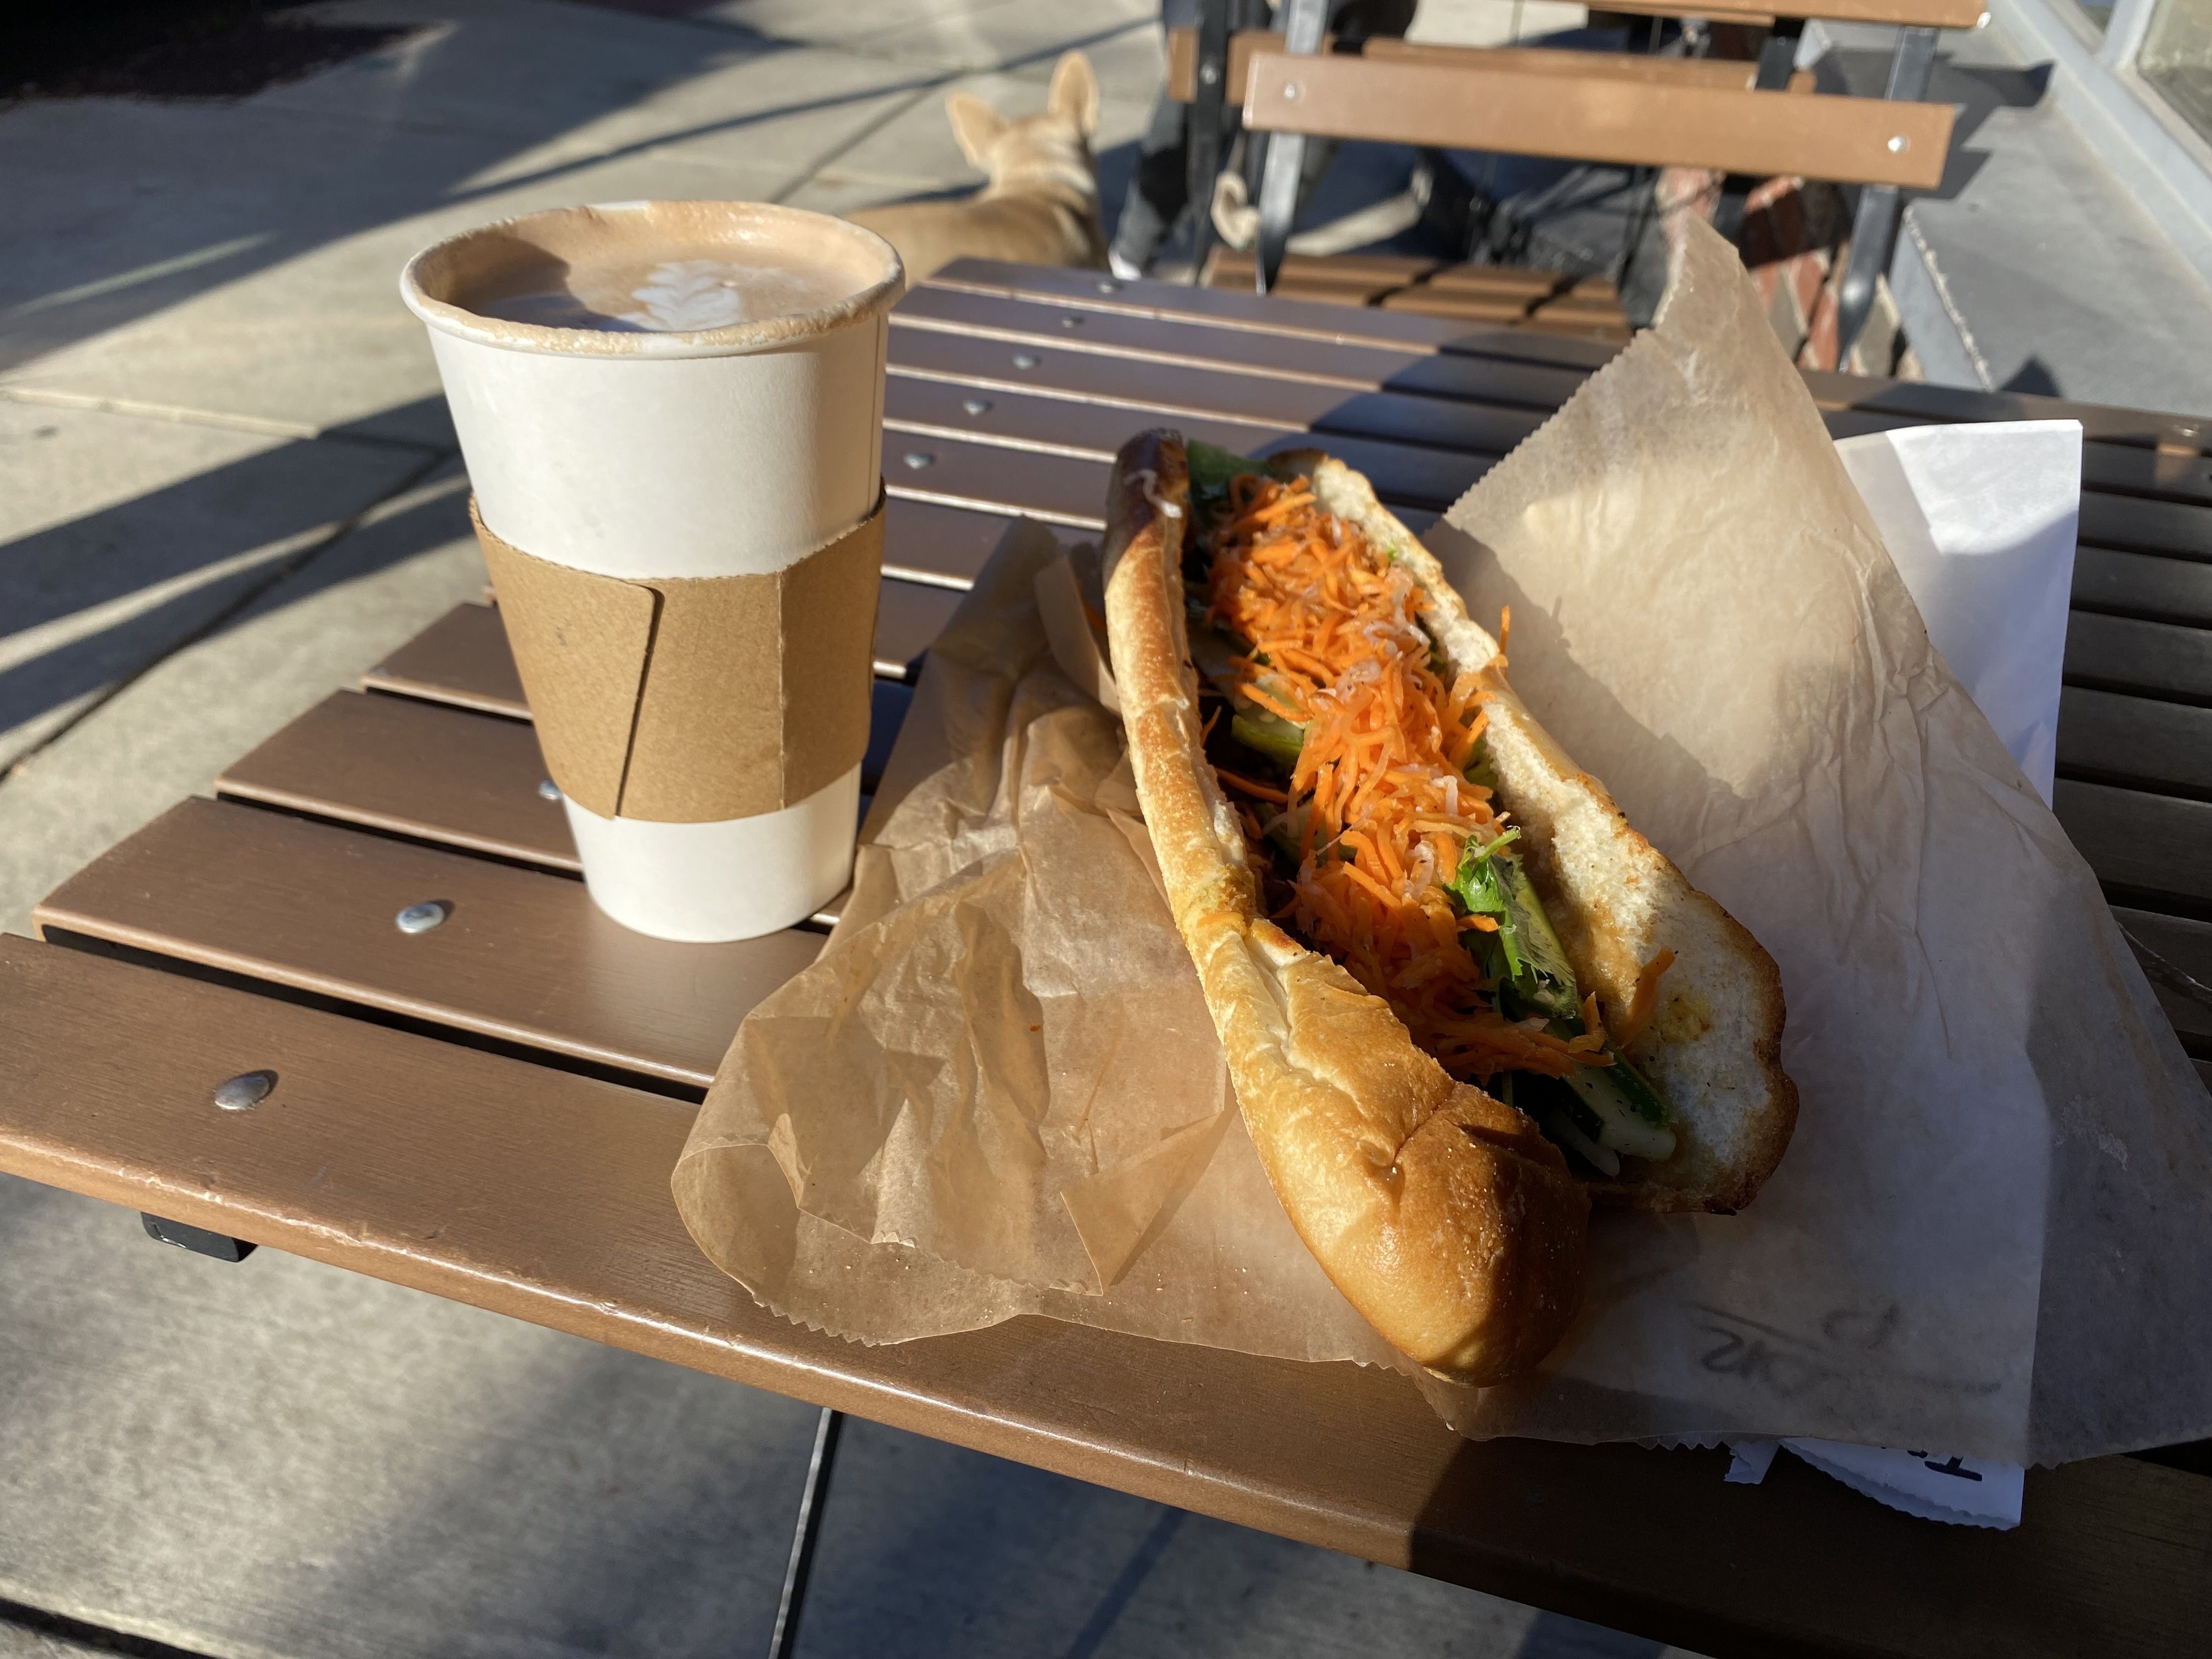 A mocha and a pork banh mi from Brown Street Coffee and Banhery Photo: Taylor Allen/Axios